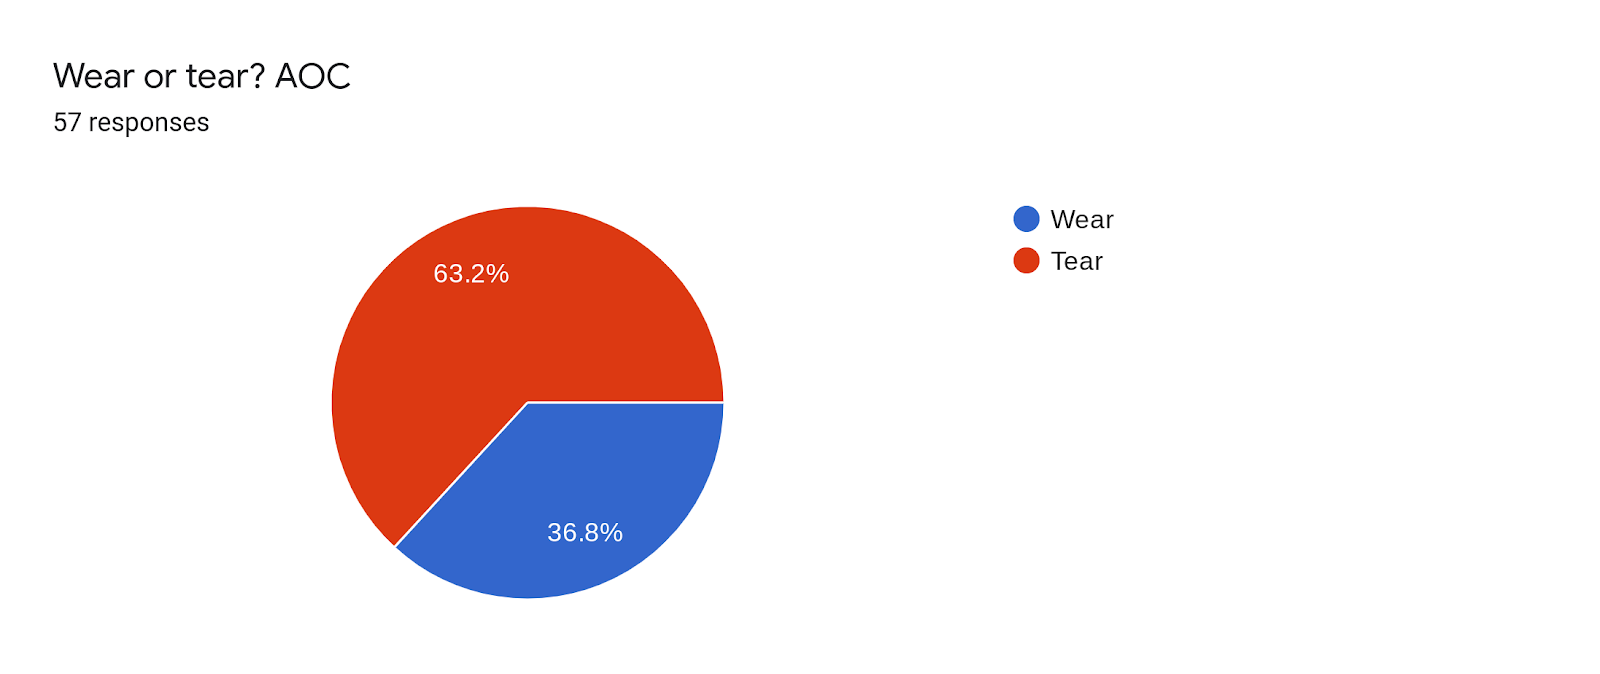 Forms response chart. Question title: Wear or tear? AOC. Number of responses: 57 responses.